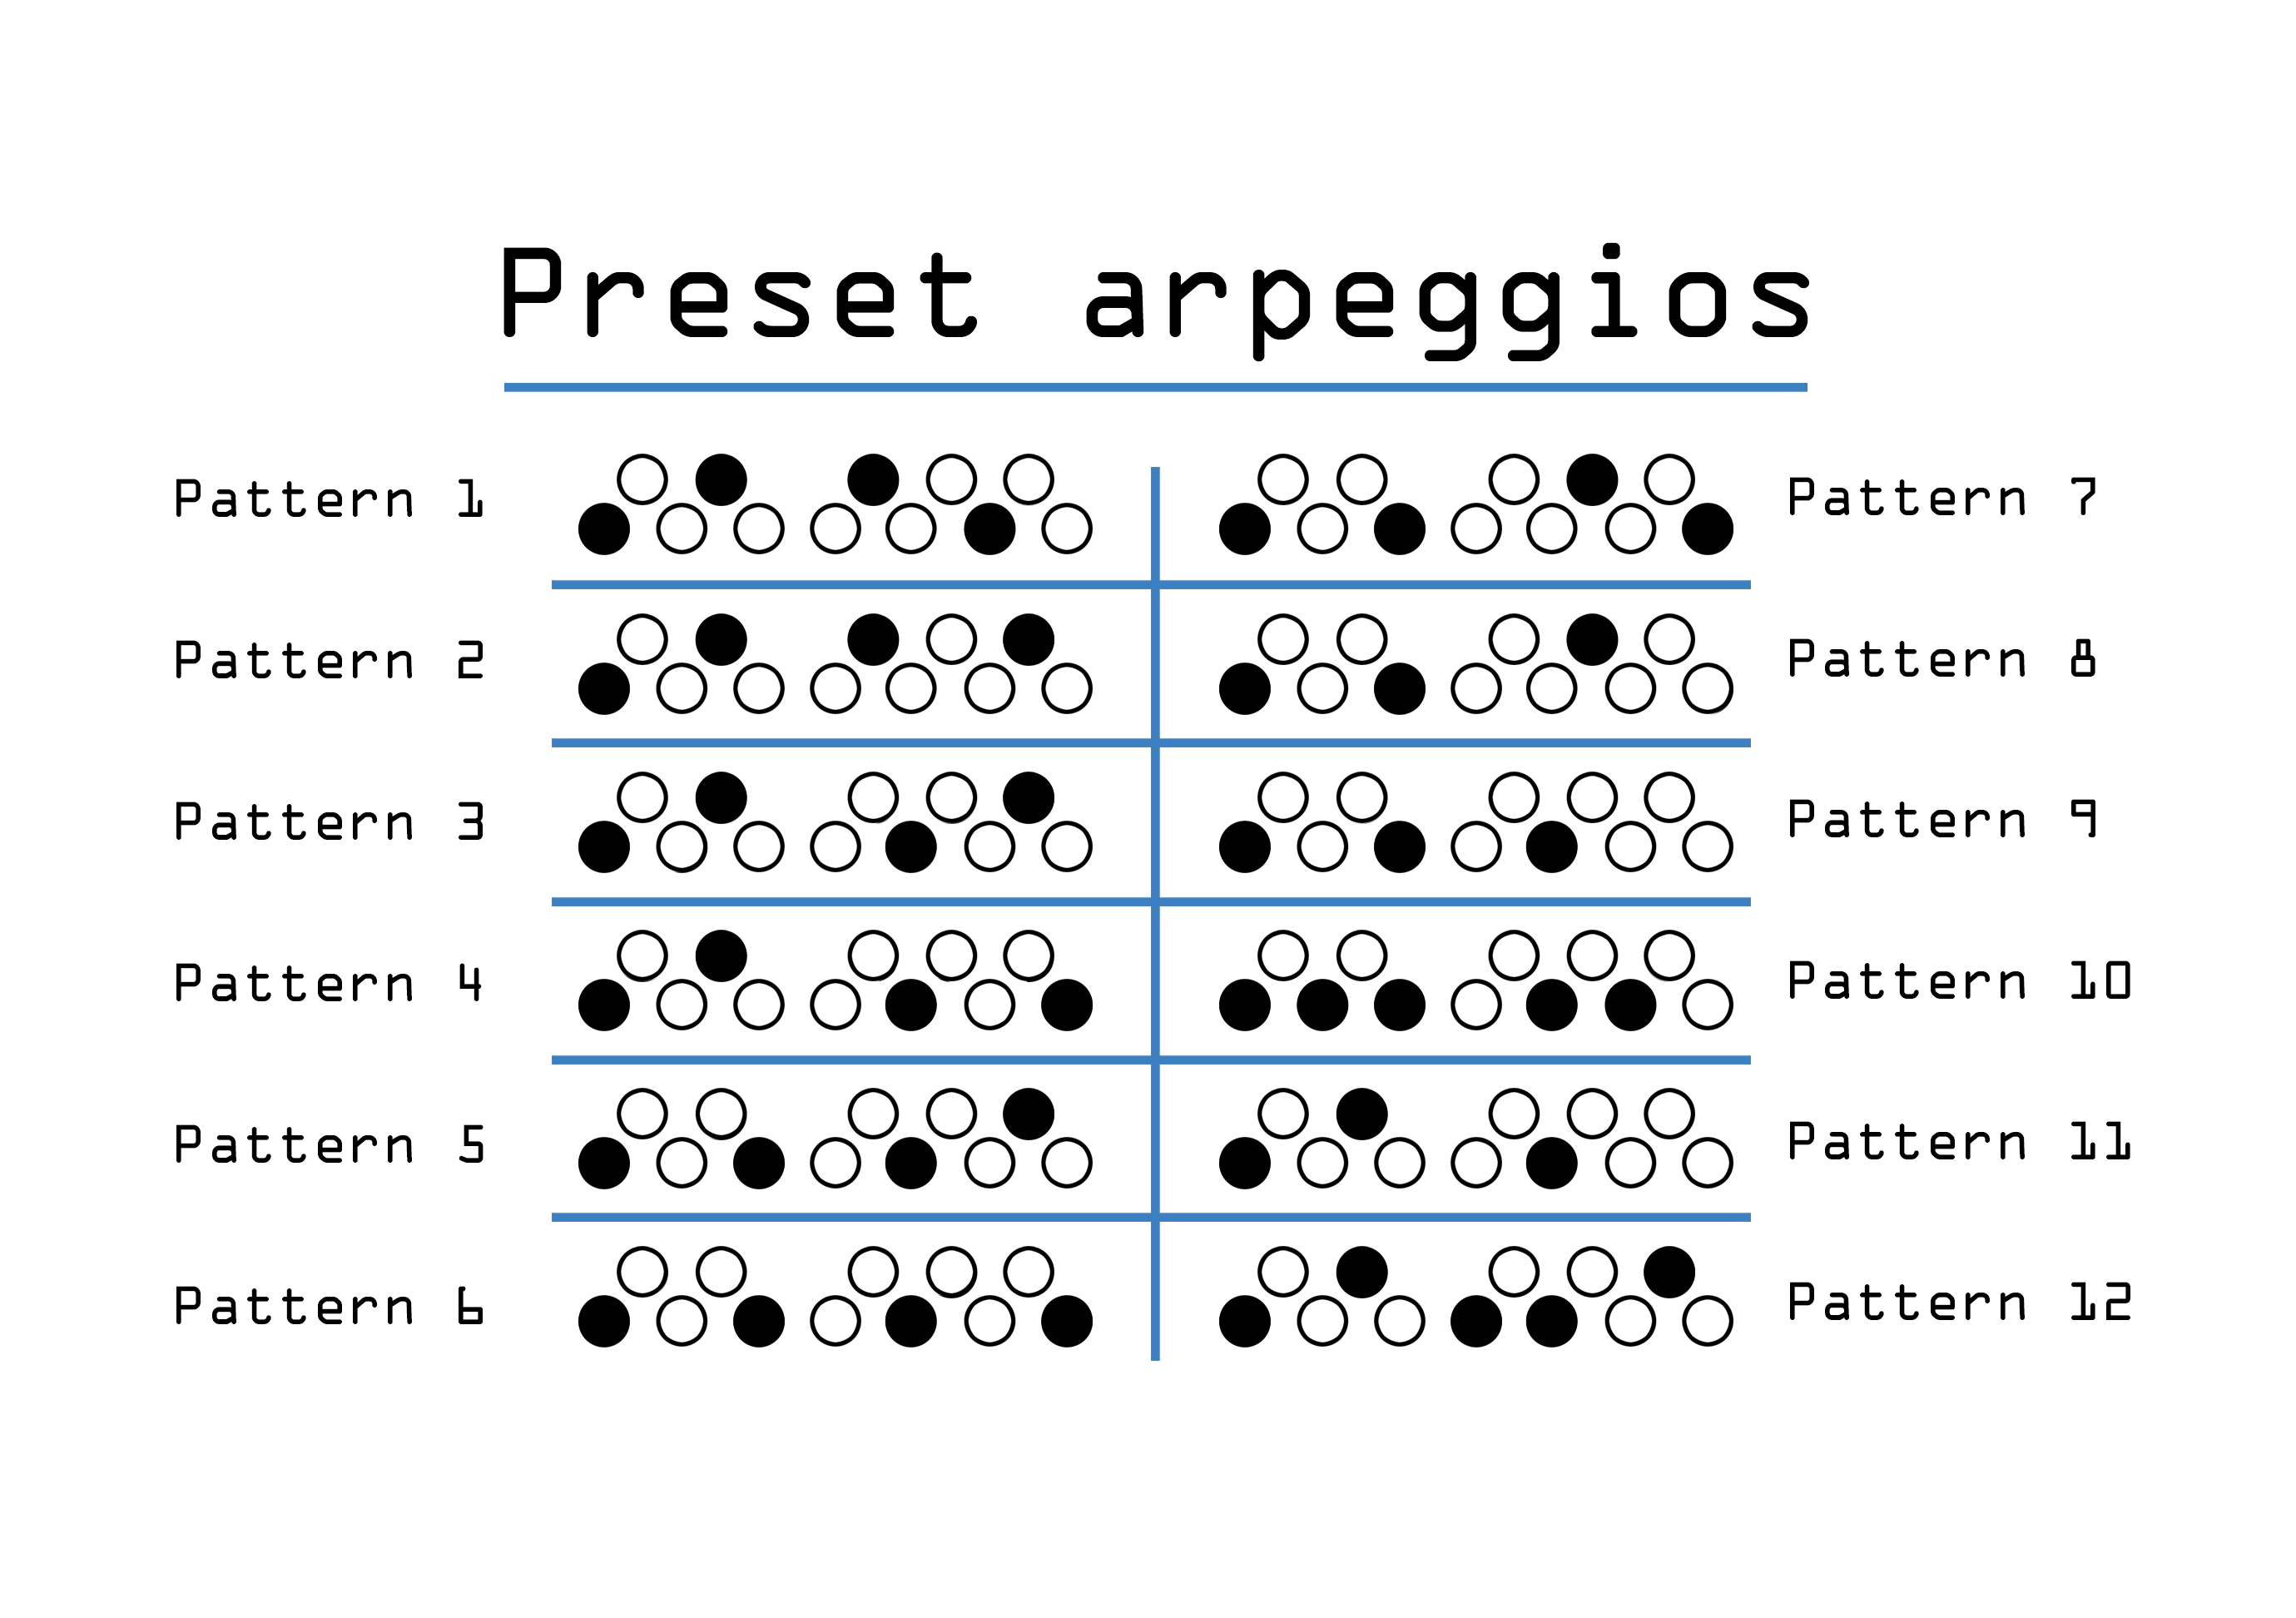 An illustration of the 12 default arpeggios that come installed on Opp Ned